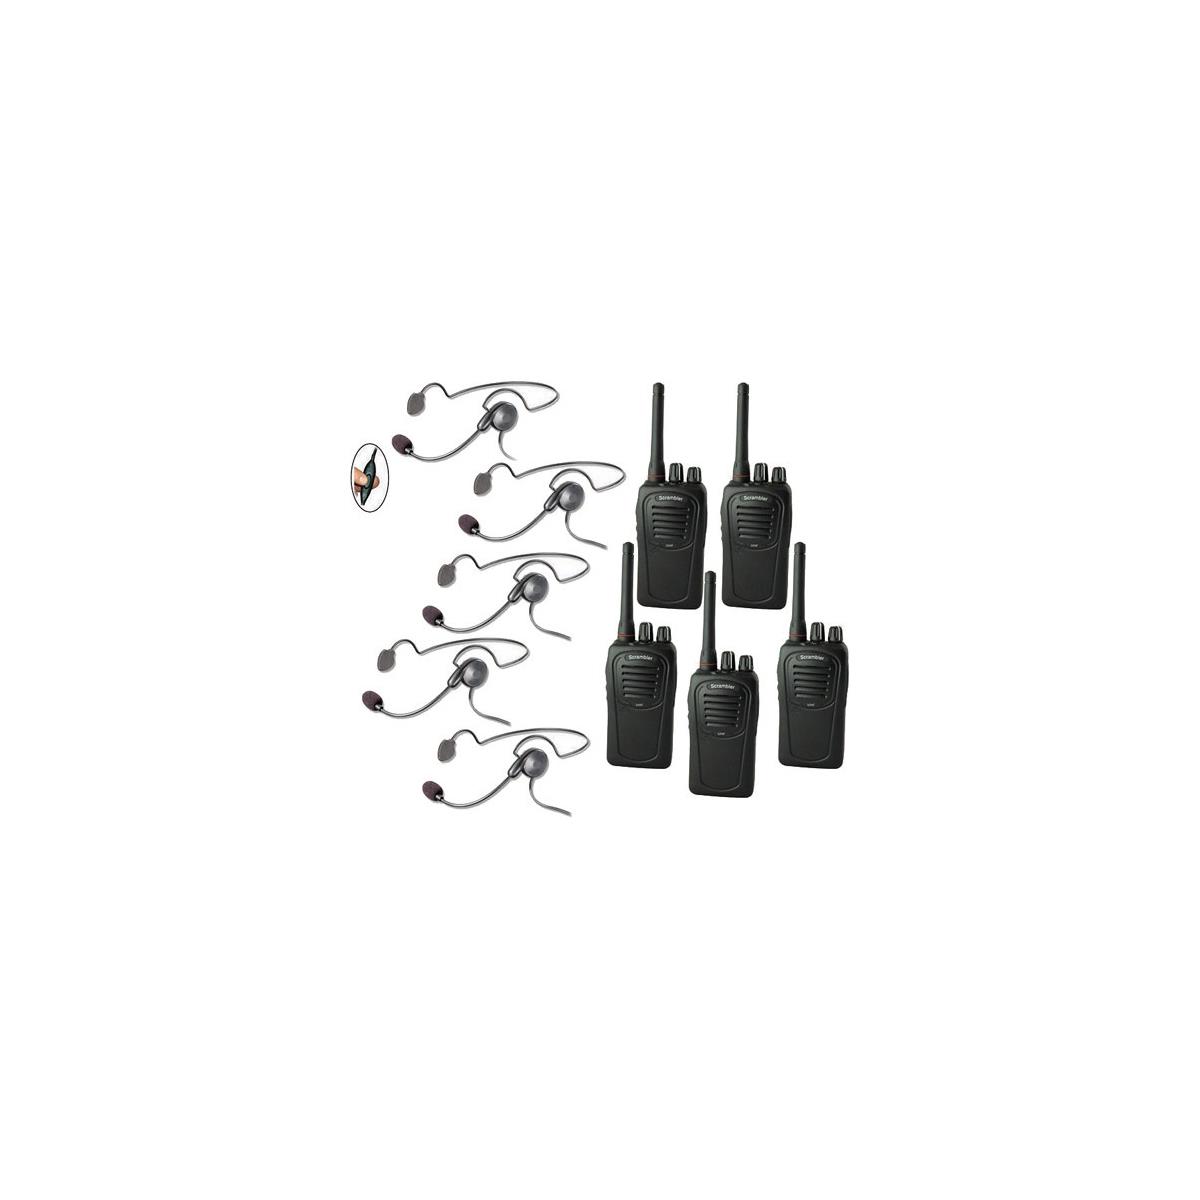 Image of Eartec SC-1000 5-User Two-Way Radio System with 5x Cyber Inline PTT Headsets